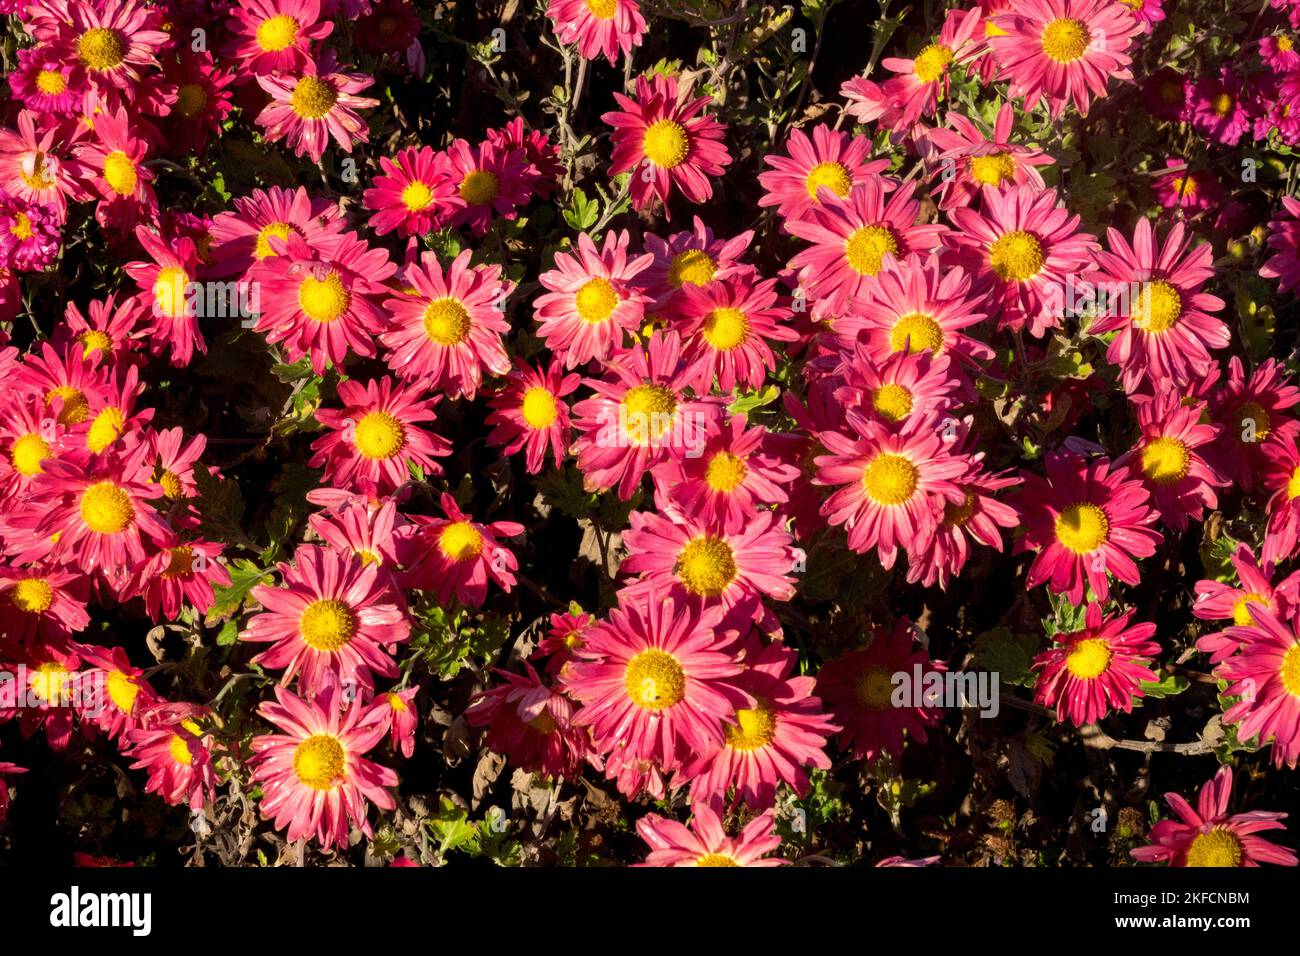 Autumn, Blooms, Red, Rose, Flowers, Flowering, Dendranthema, Chrysanthemum, October, Colors Stock Photo